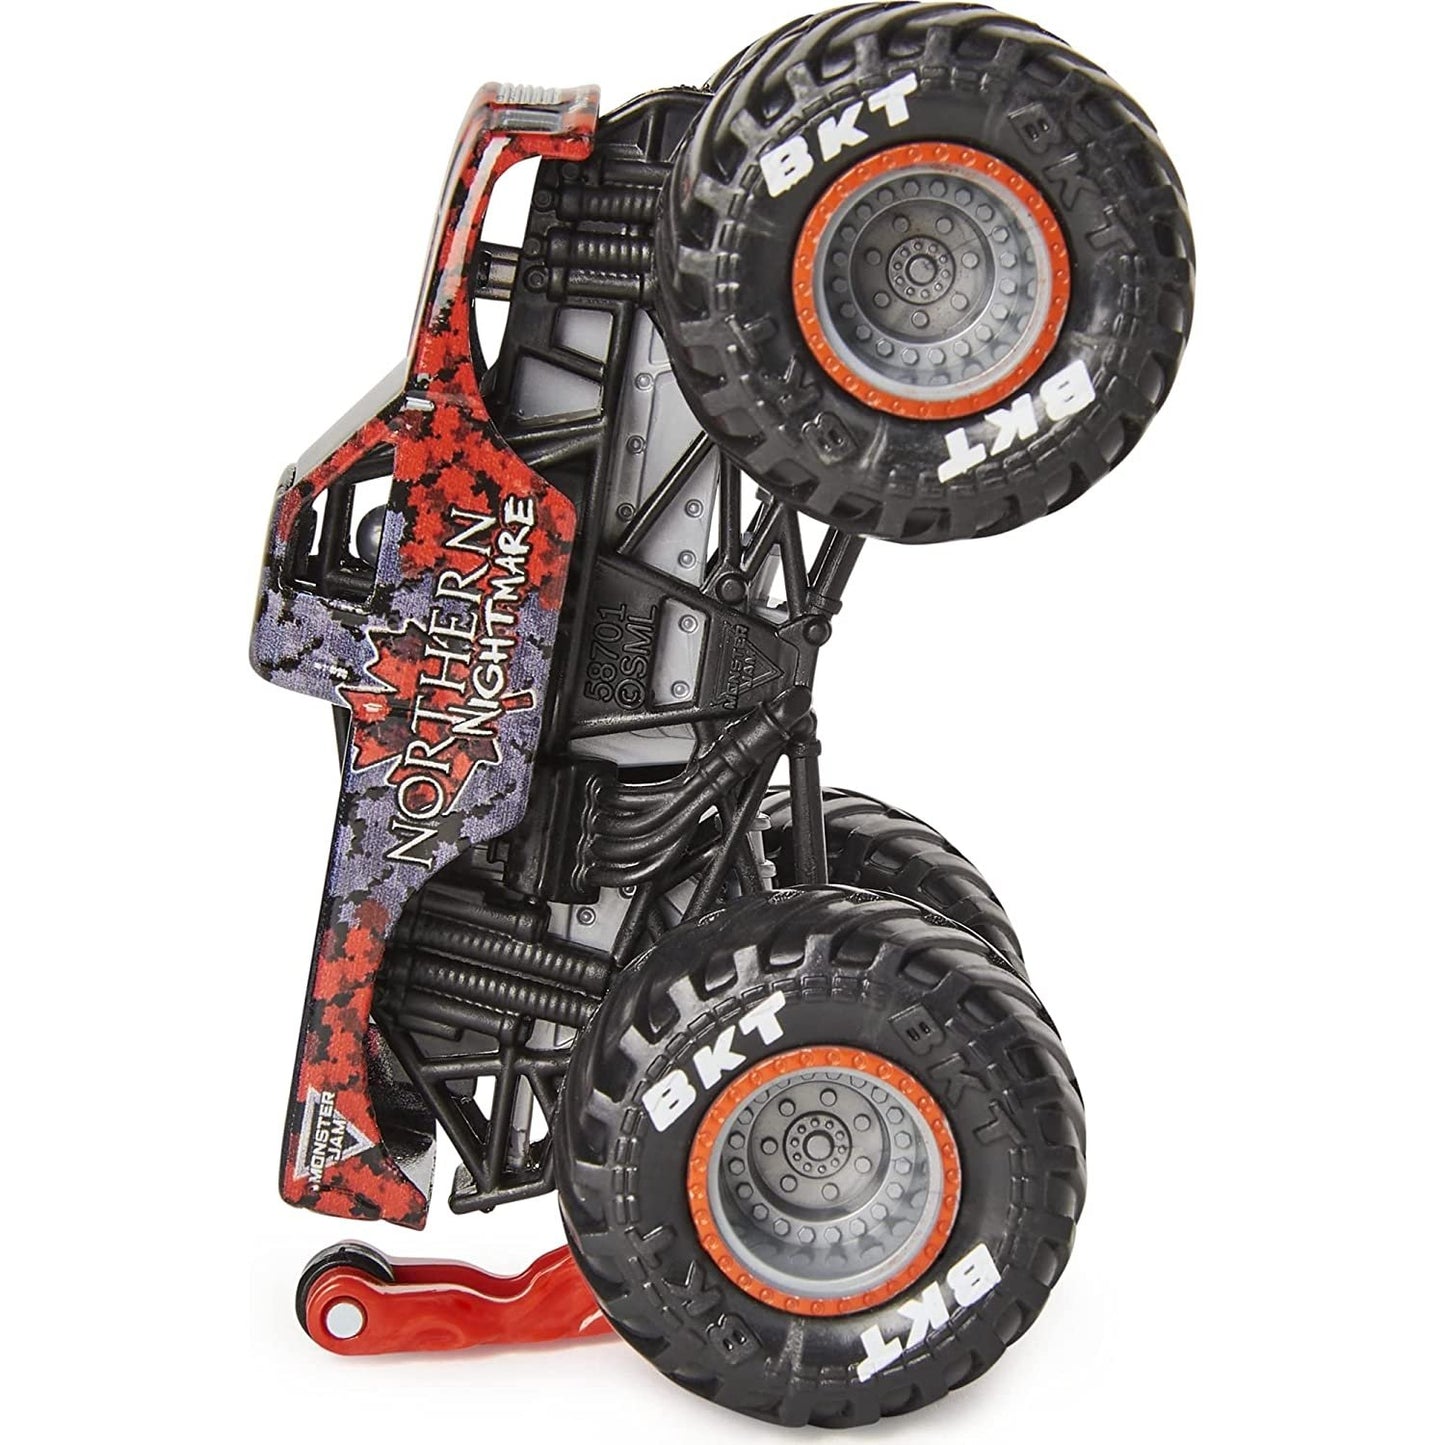 Monster Jam 2021 Spin Master 1:64 Diecast Monster Truck with Wheelie Bar: Legacy Trucks Northern Nightmare from 2P Gaming